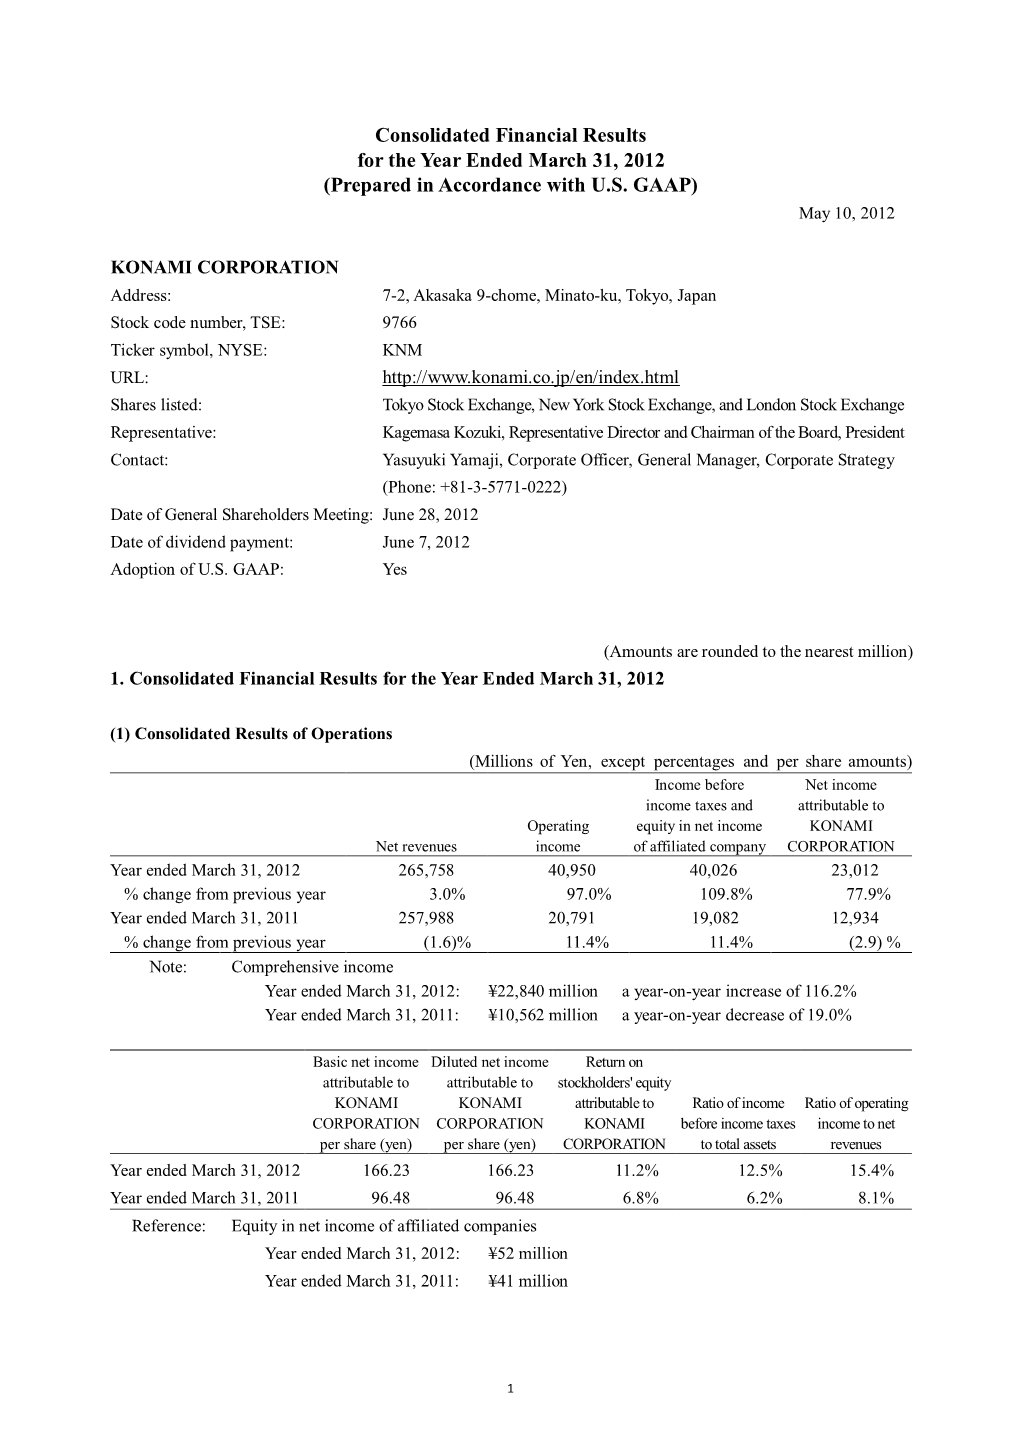 Consolidated Financial Results for the Year Ended March 31, 2012 (Prepared in Accordance with U.S